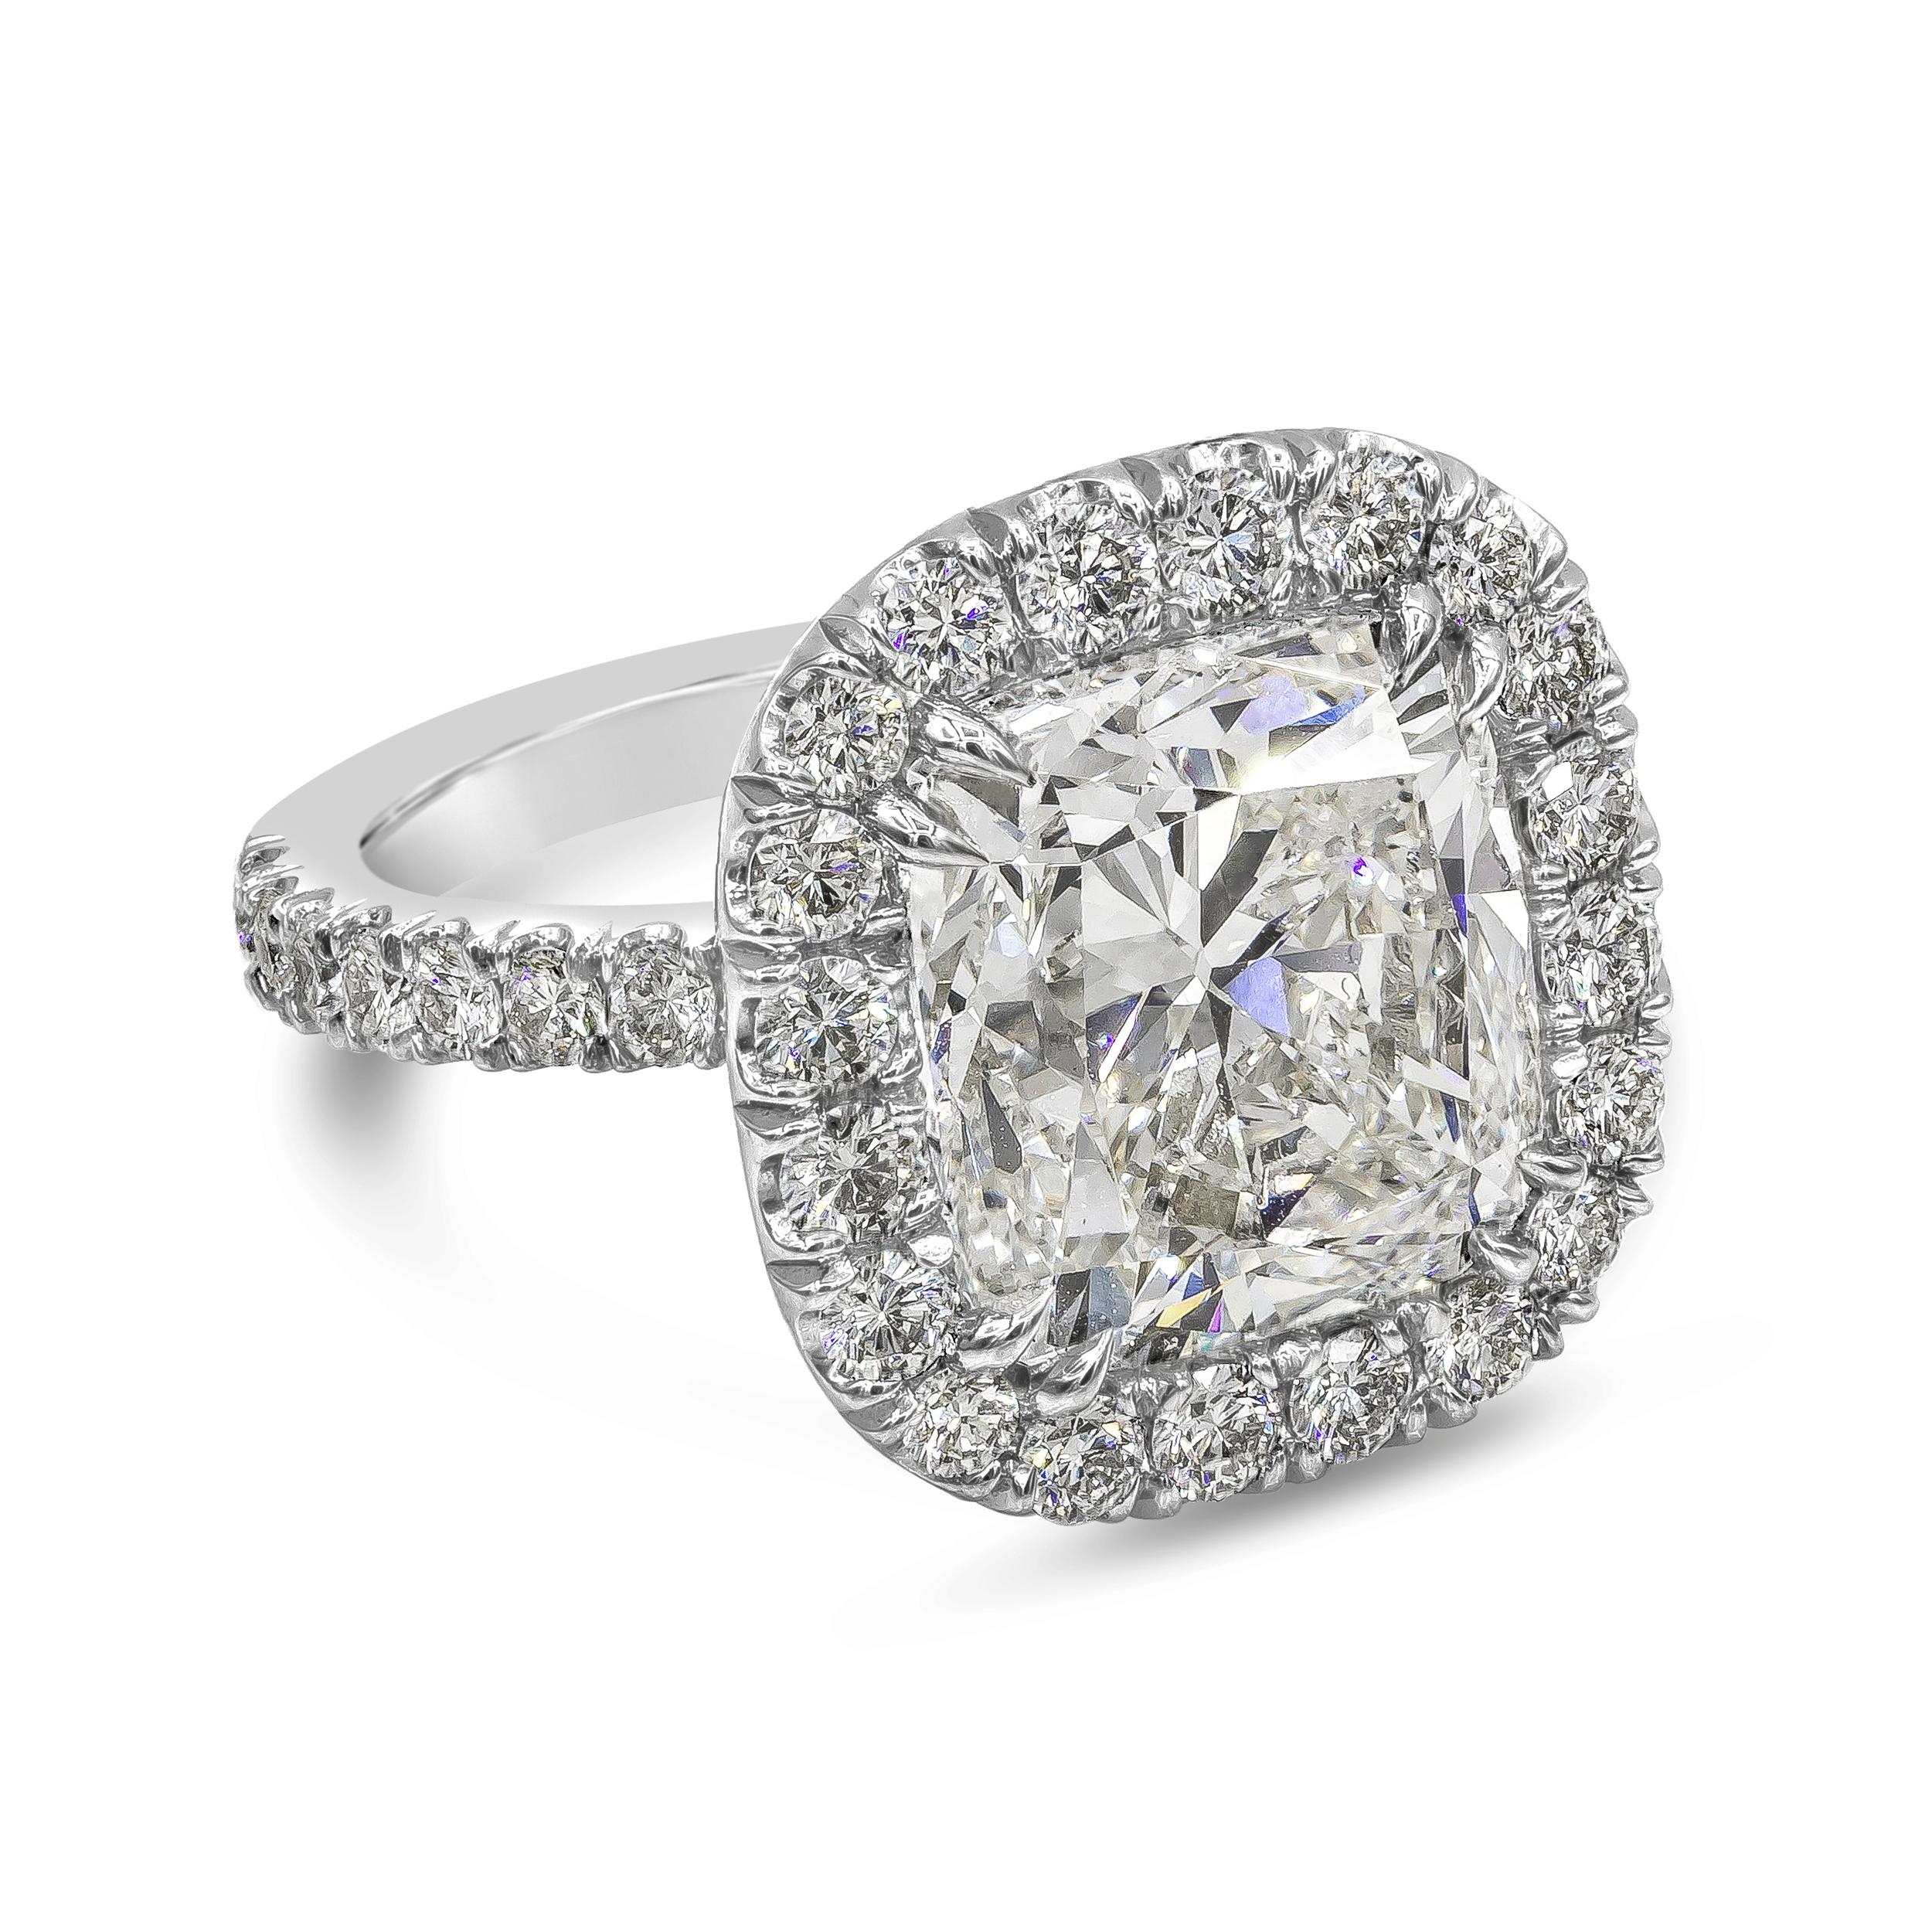 A chic jewelry piece showcasing a GIA Certified 10.12 carat cushion cut diamond, J Color and SI1 in Clarity. Surrounding the center diamond is a row of round brilliant diamonds, set in an accented basket and band weighing 1.90 carats total. Made